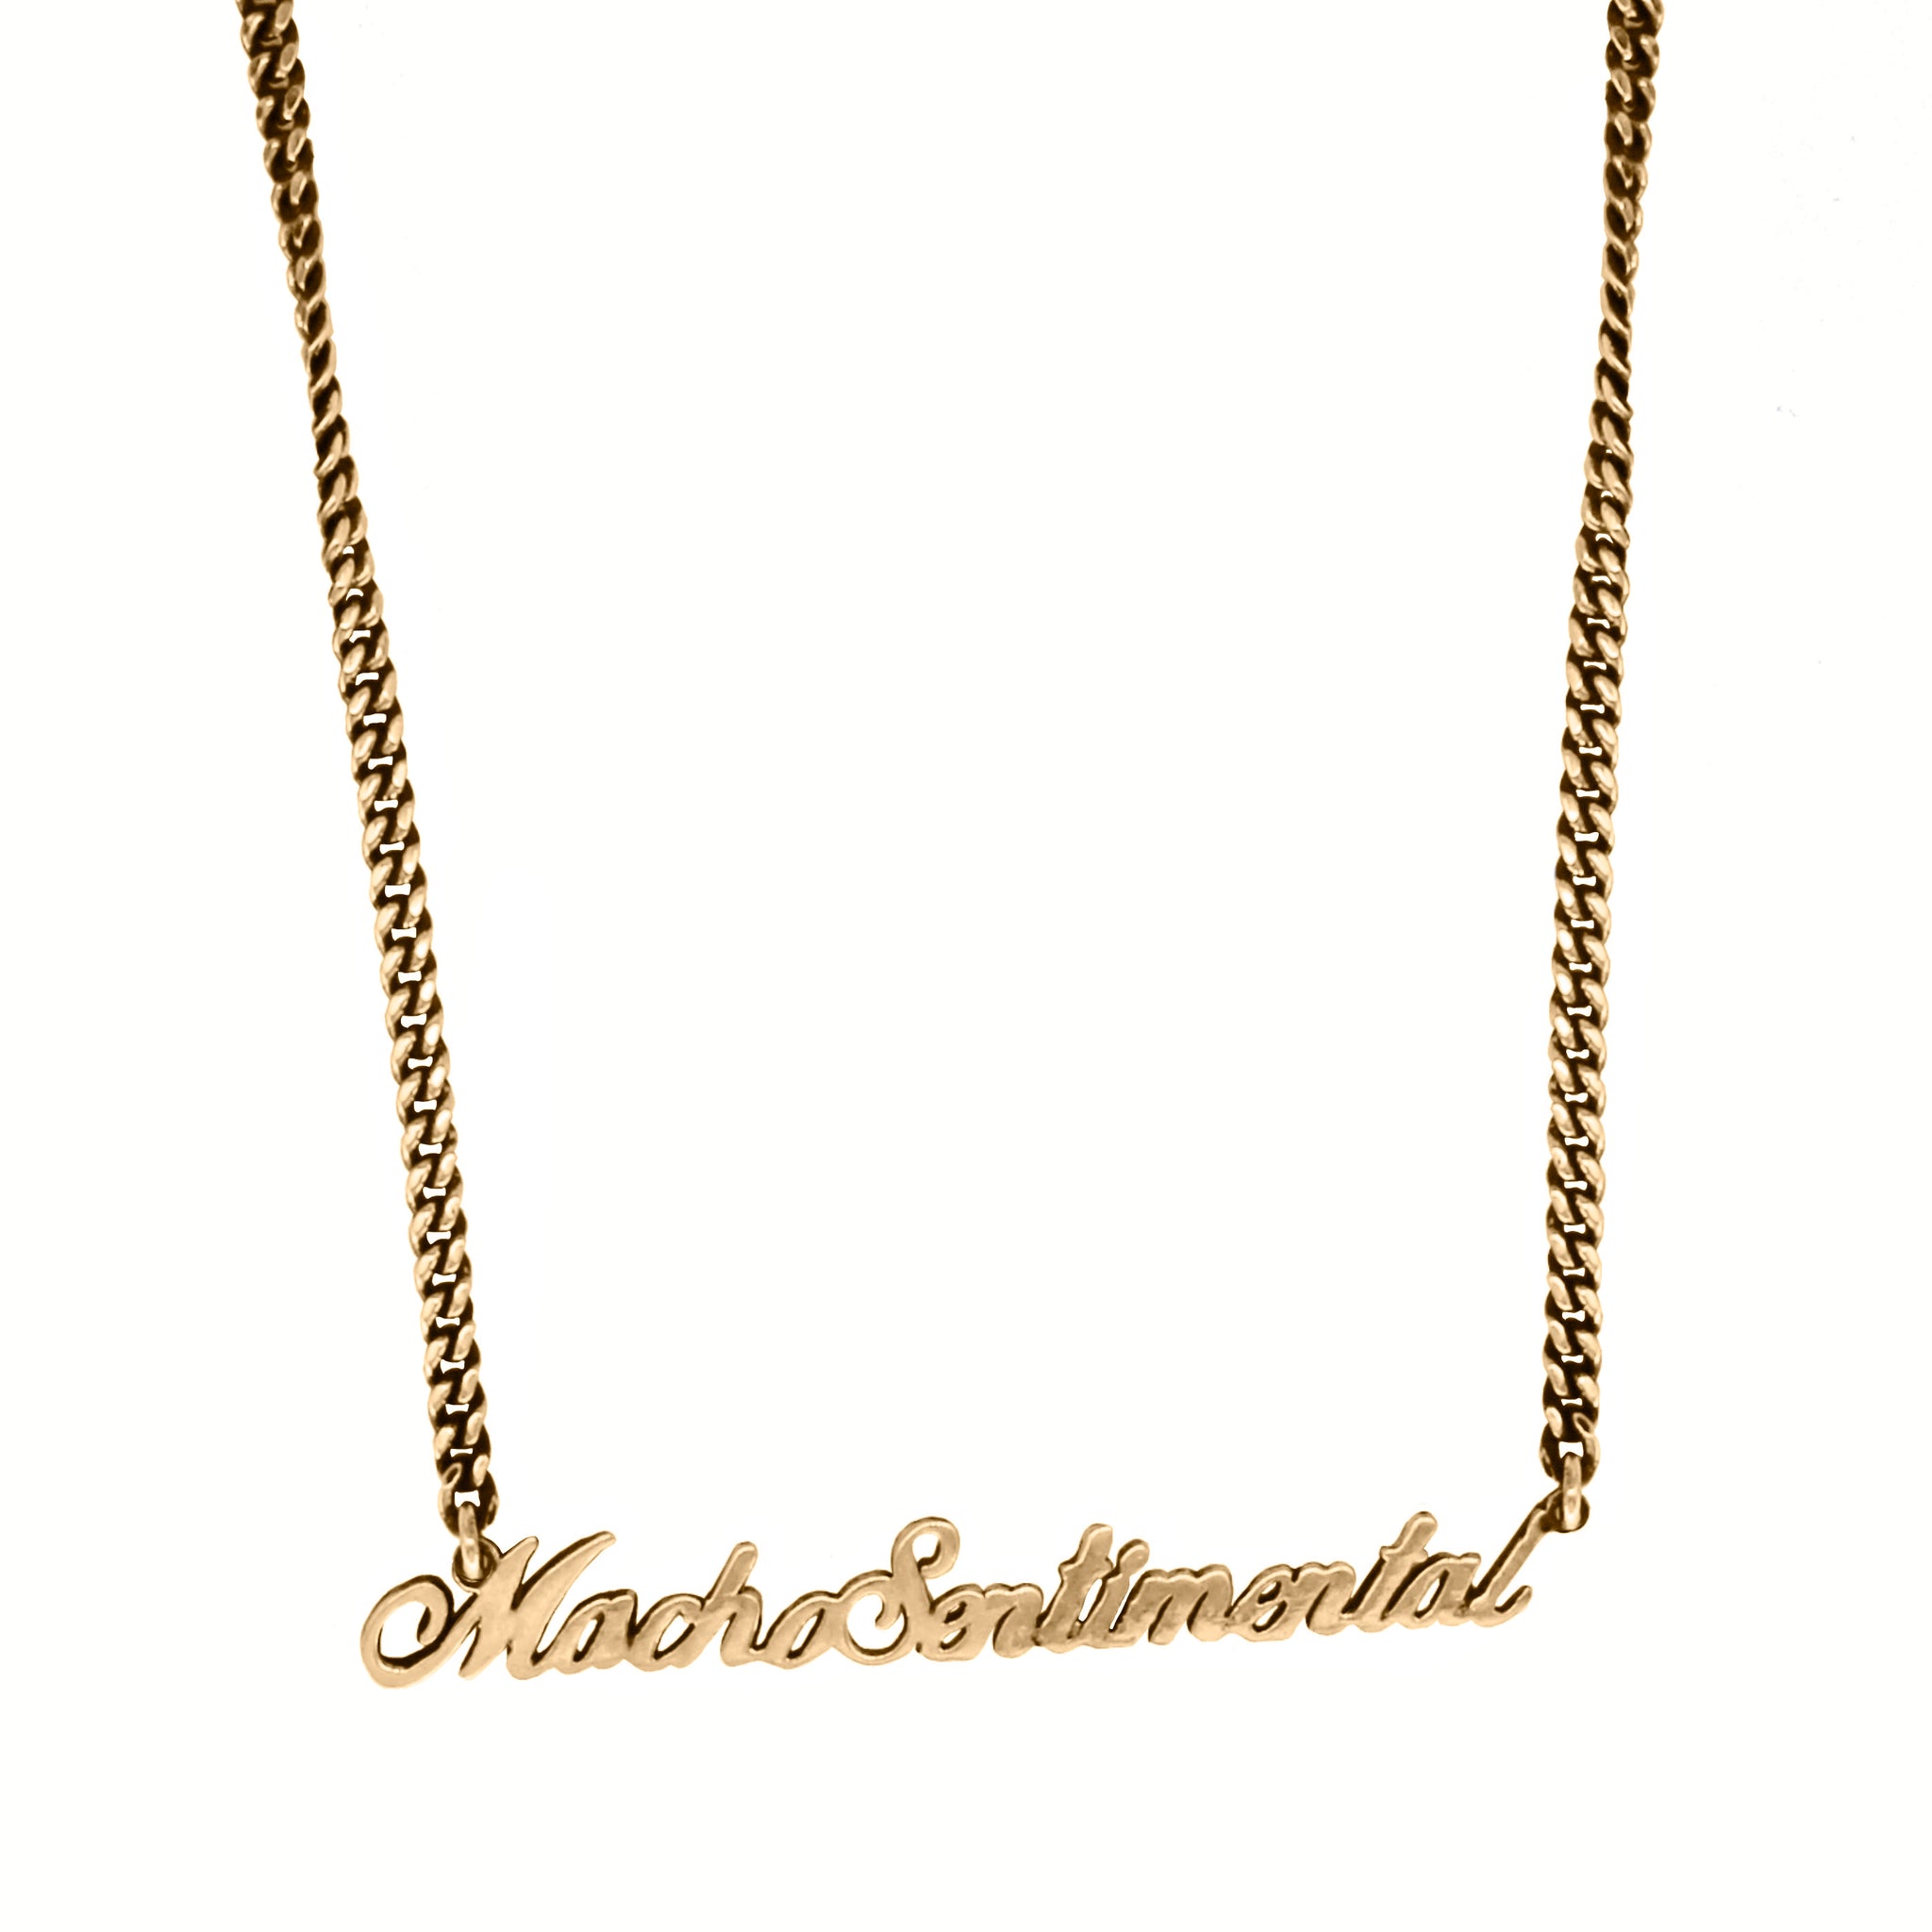 Macho Sentimental Necklace - Gold Plated